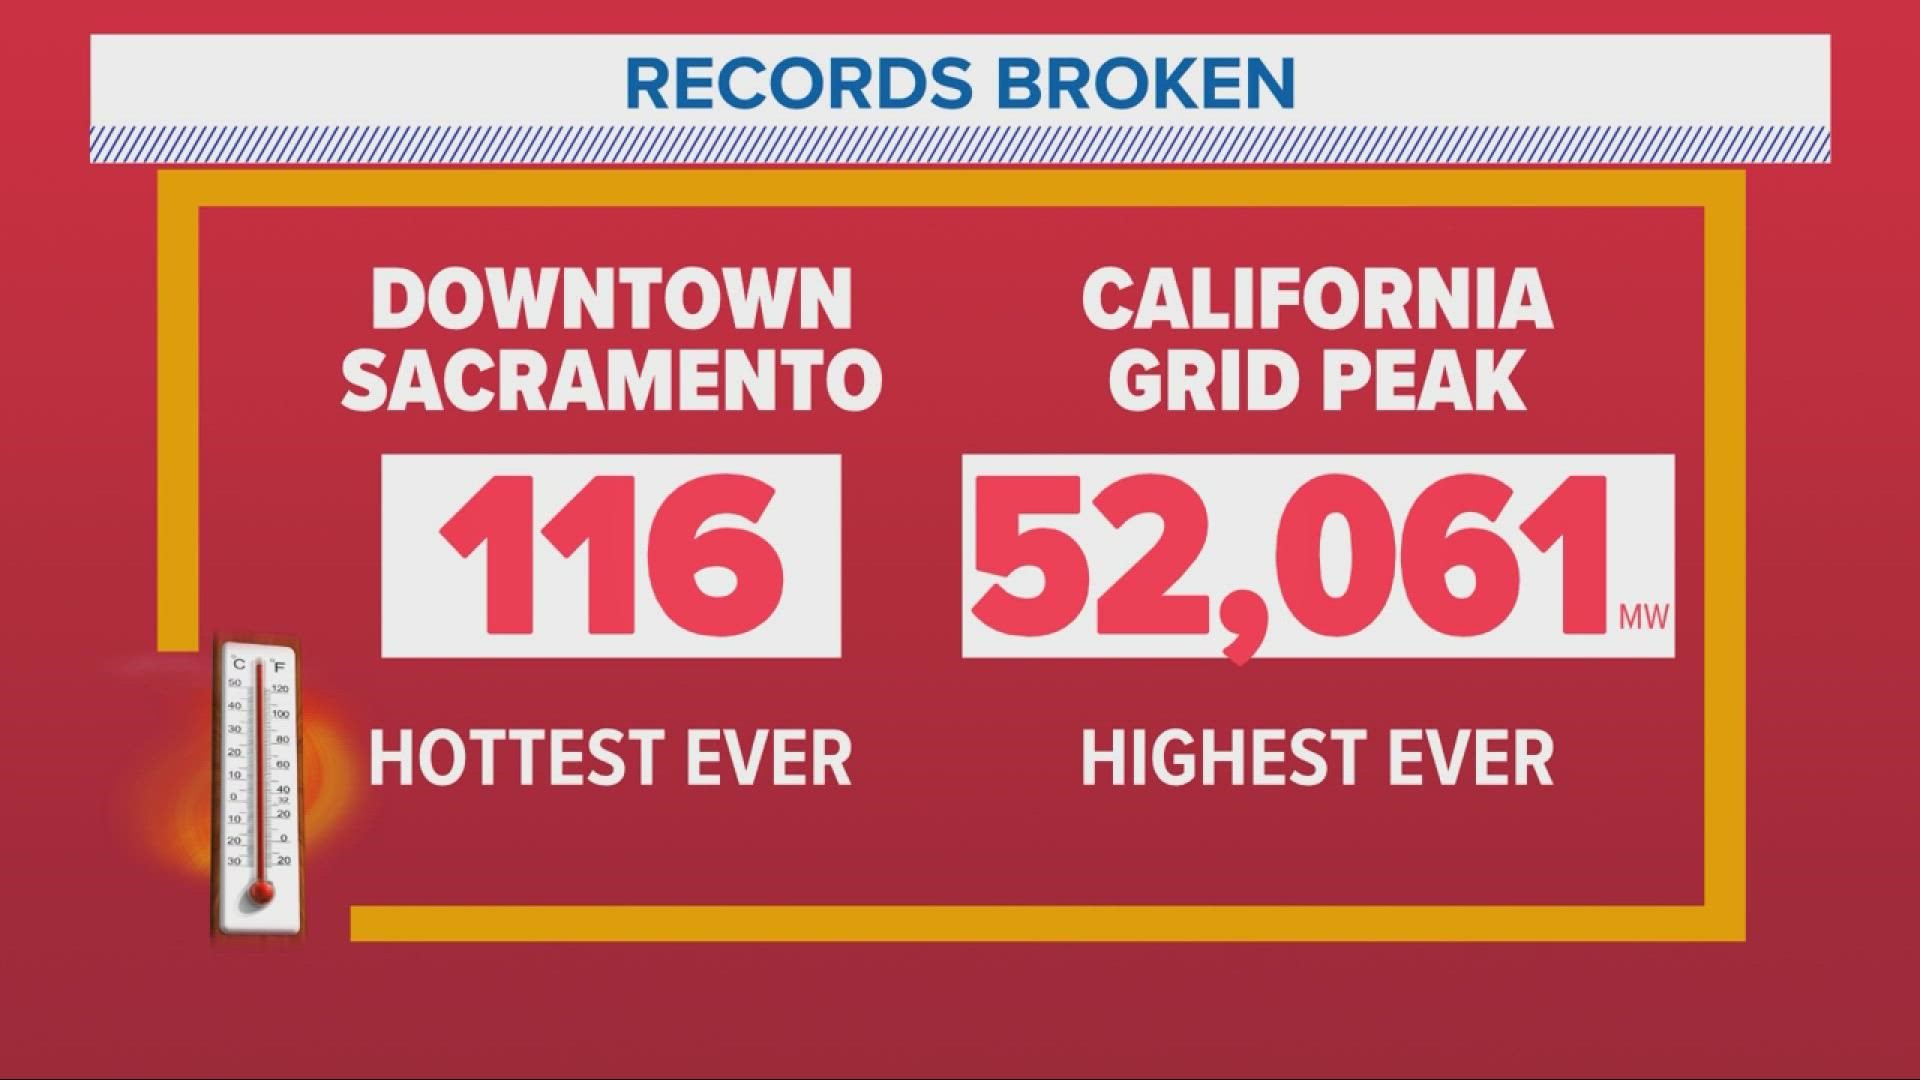 It was a historic day in Sacramento as official readings measured a temperature of 116 degrees